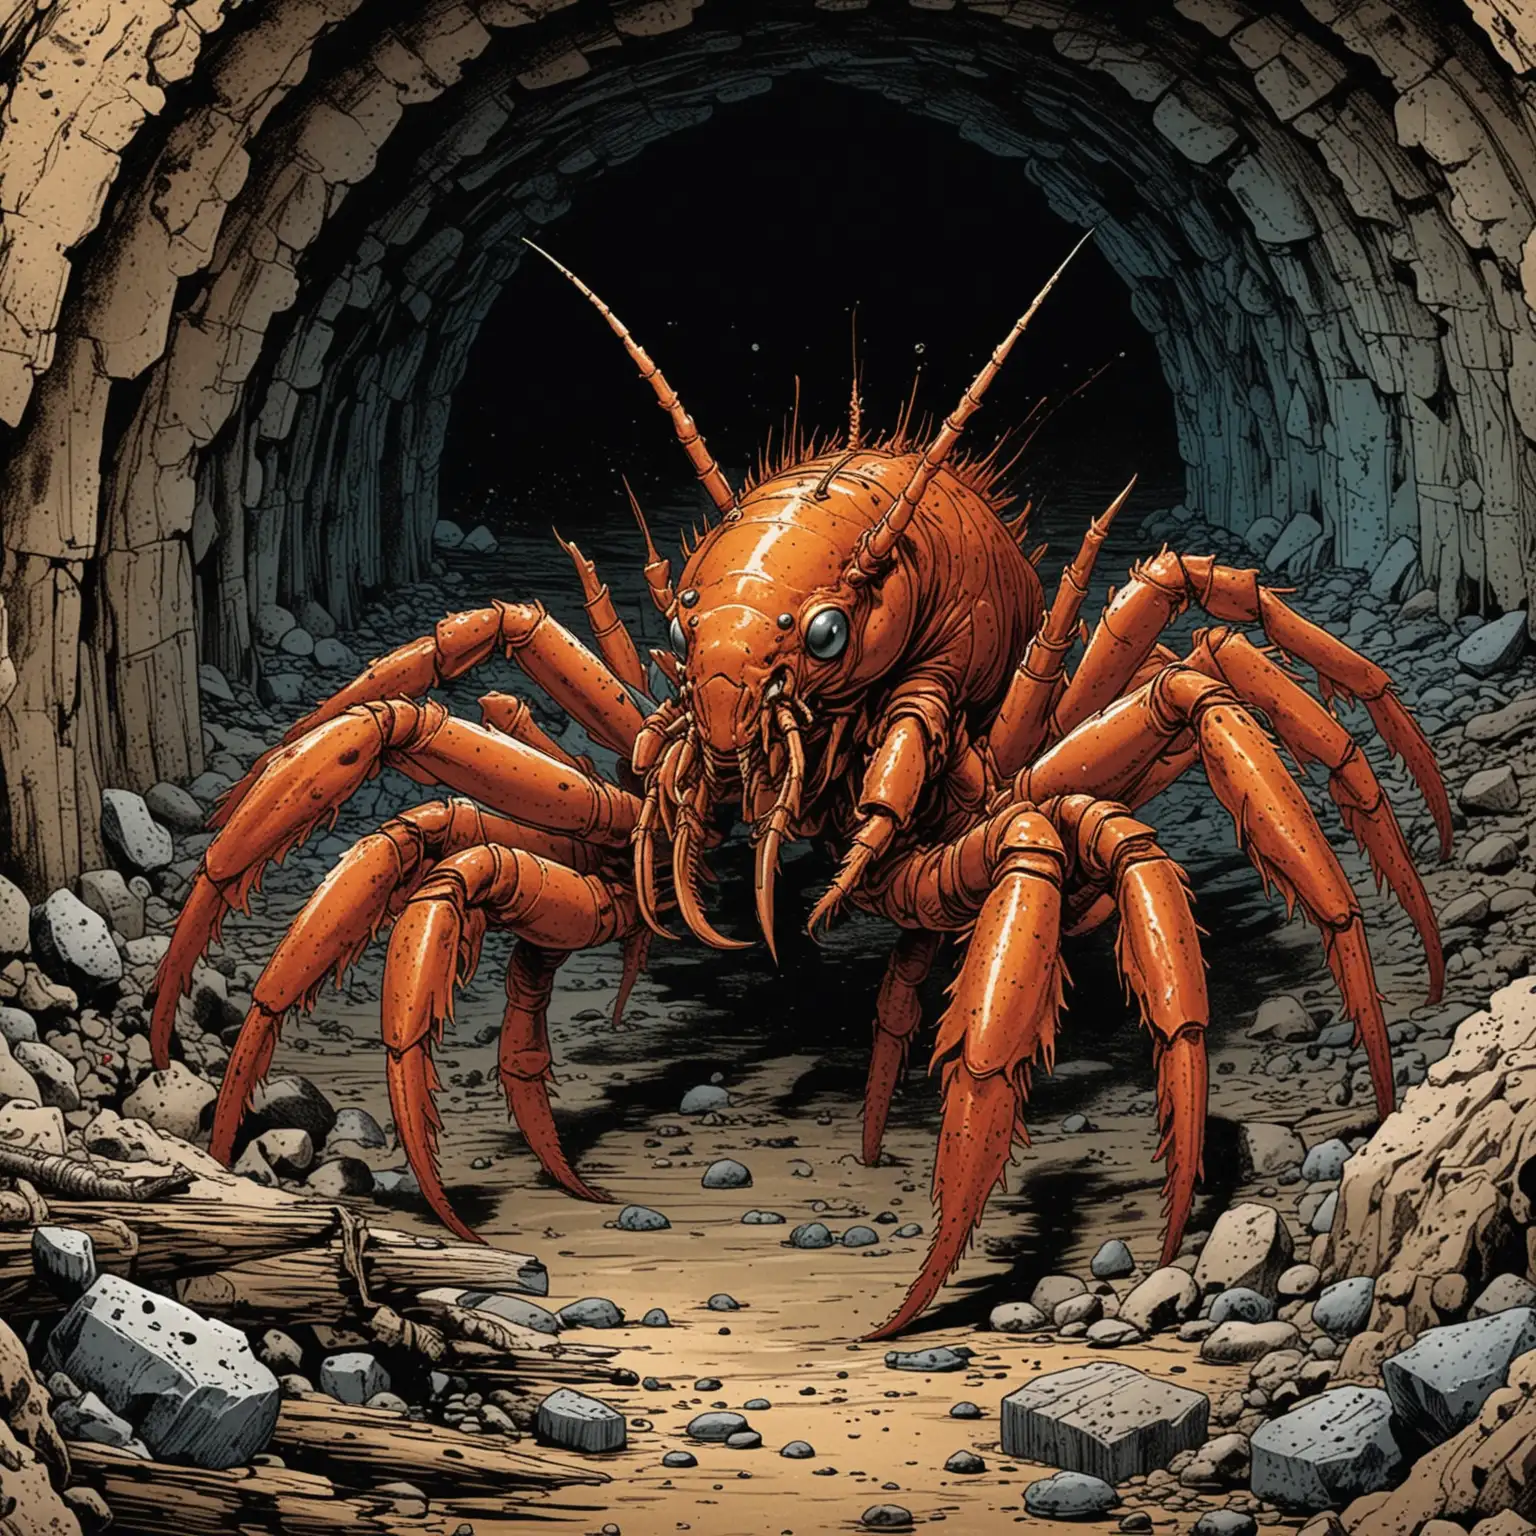 comic book inked color art style; one mutant crayfish with four powerful pincers and an armoured shell in a mine tunnel